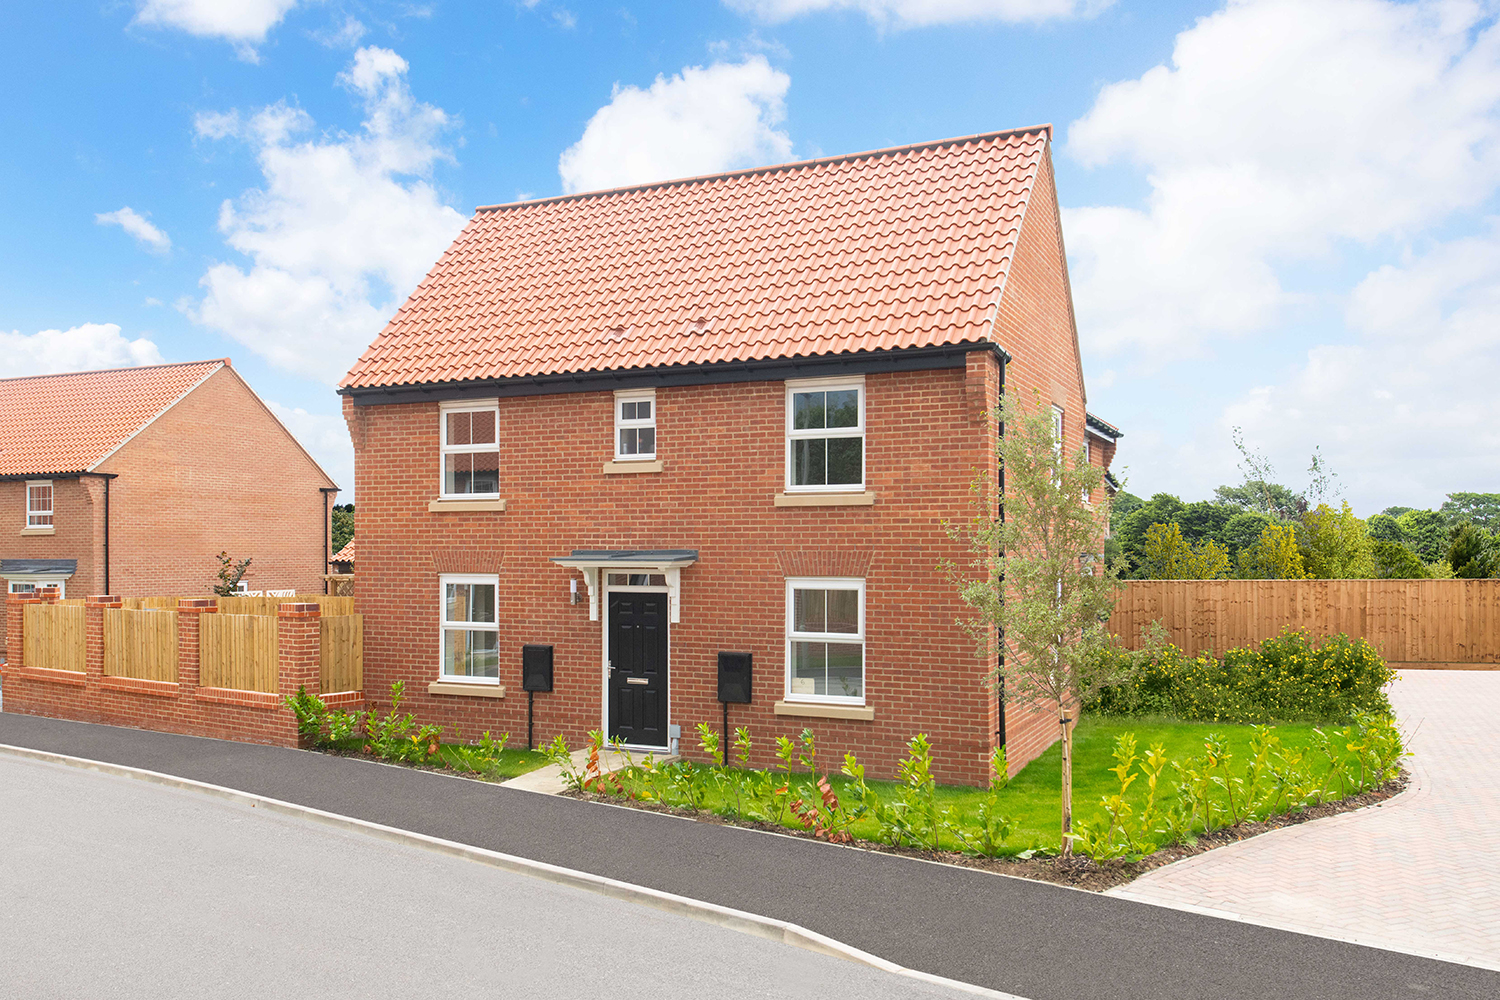 Property 1 of 7. The Hadley At St Johns View, Cayton